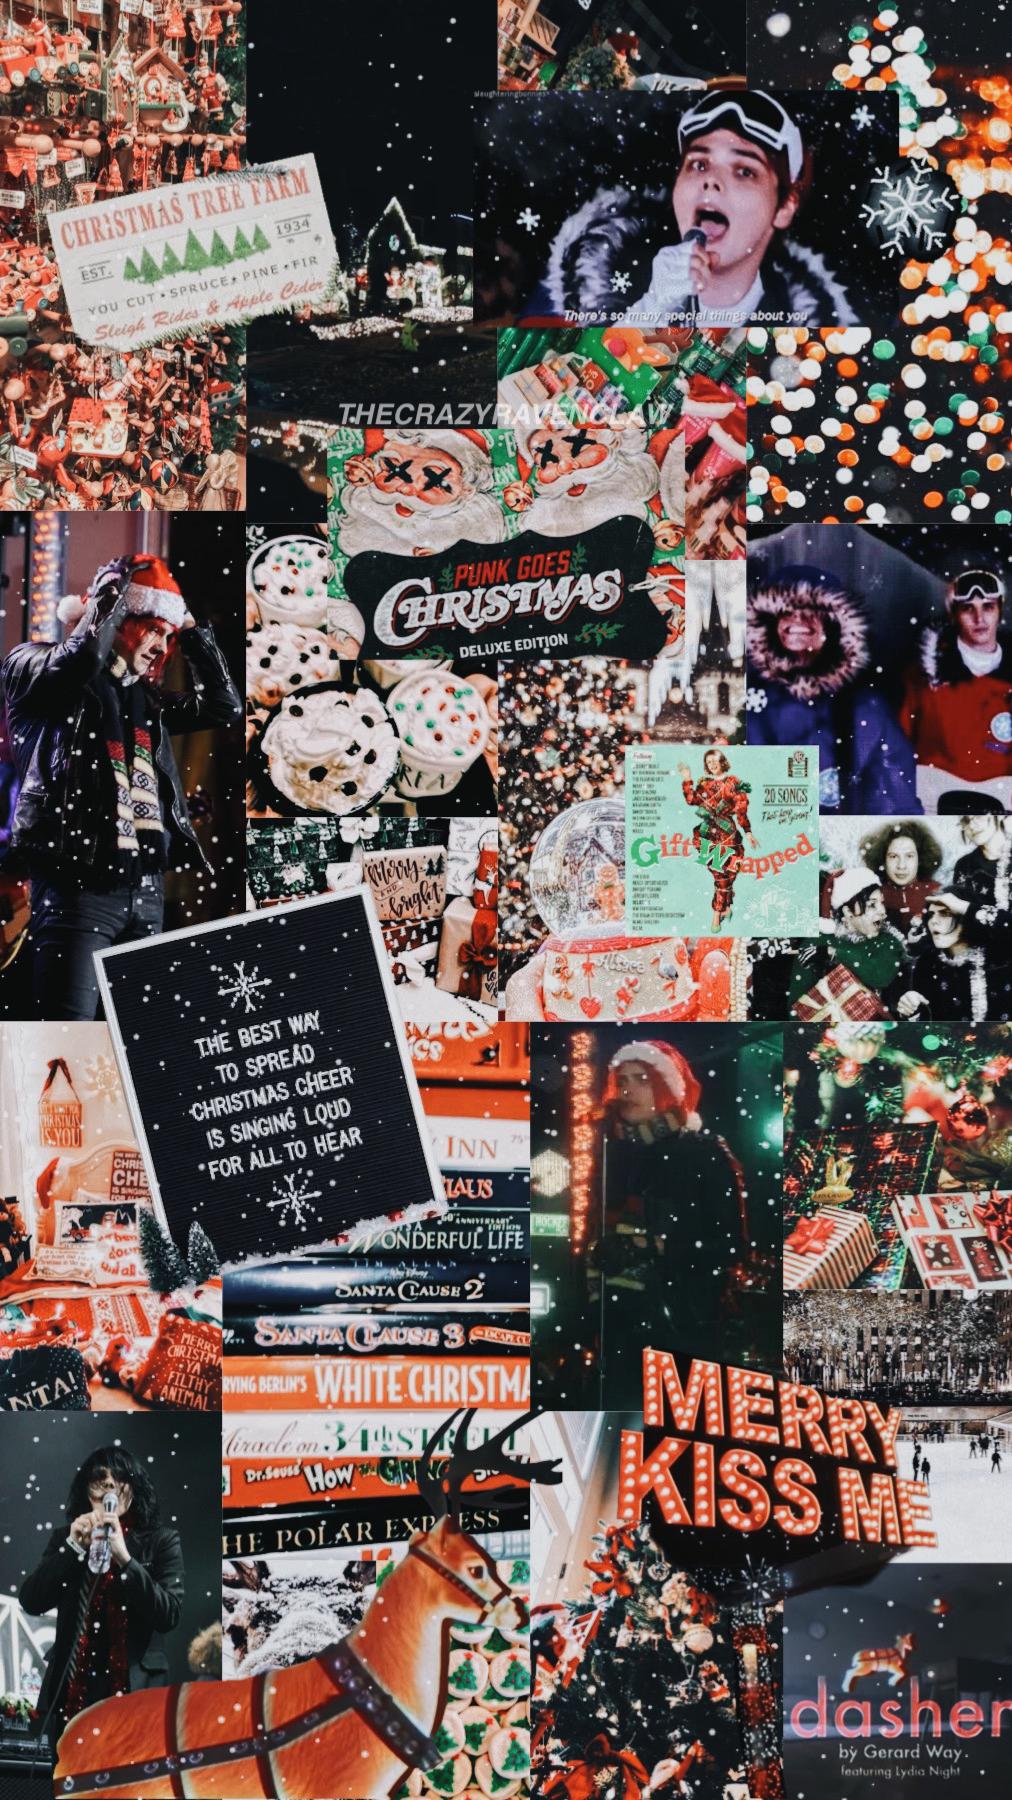 my current favorite thing + the most wonderful time of the year = ..??
EVERY SNOWFLAKE’S DIFFERENT JUST LIKE YOU-
yes i made an mcr christmas collage what about it
yes this is my wallpaper whAT ABOUT IT
comments🎅🏻